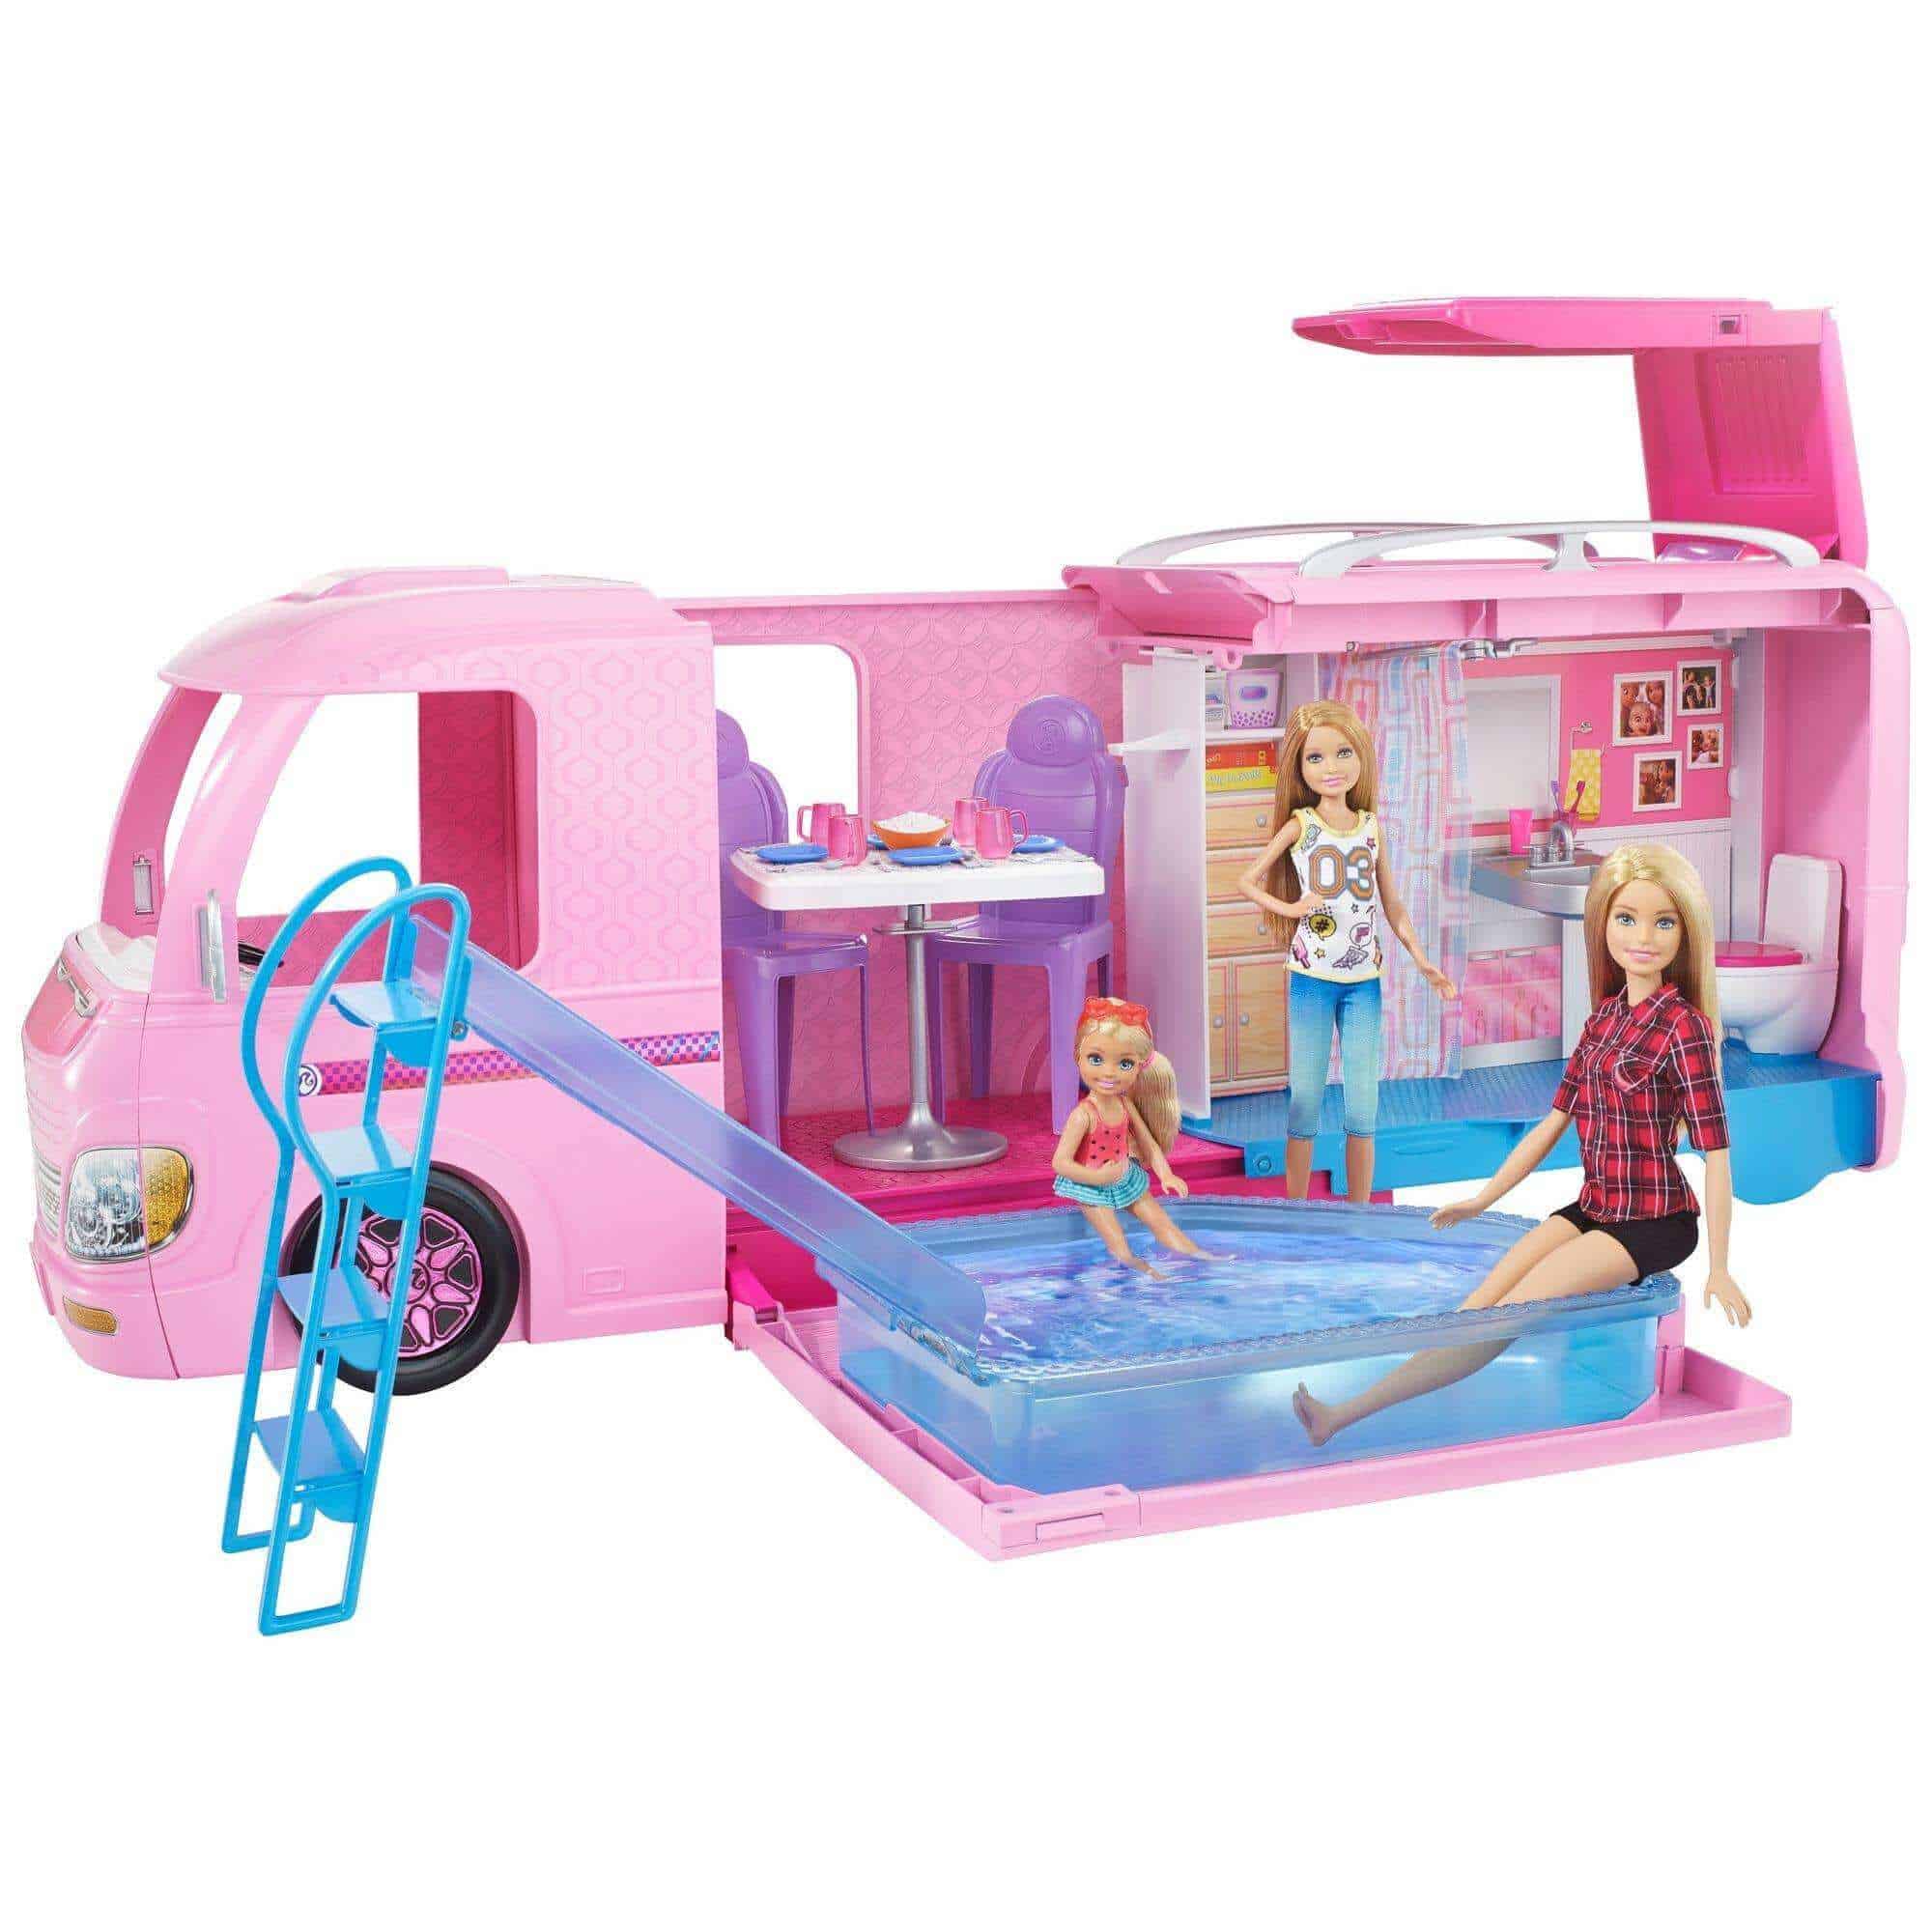 Barbie DreamCamper Adventure Camping Playset with Accessories ONLY $64.99 (Reg $110)